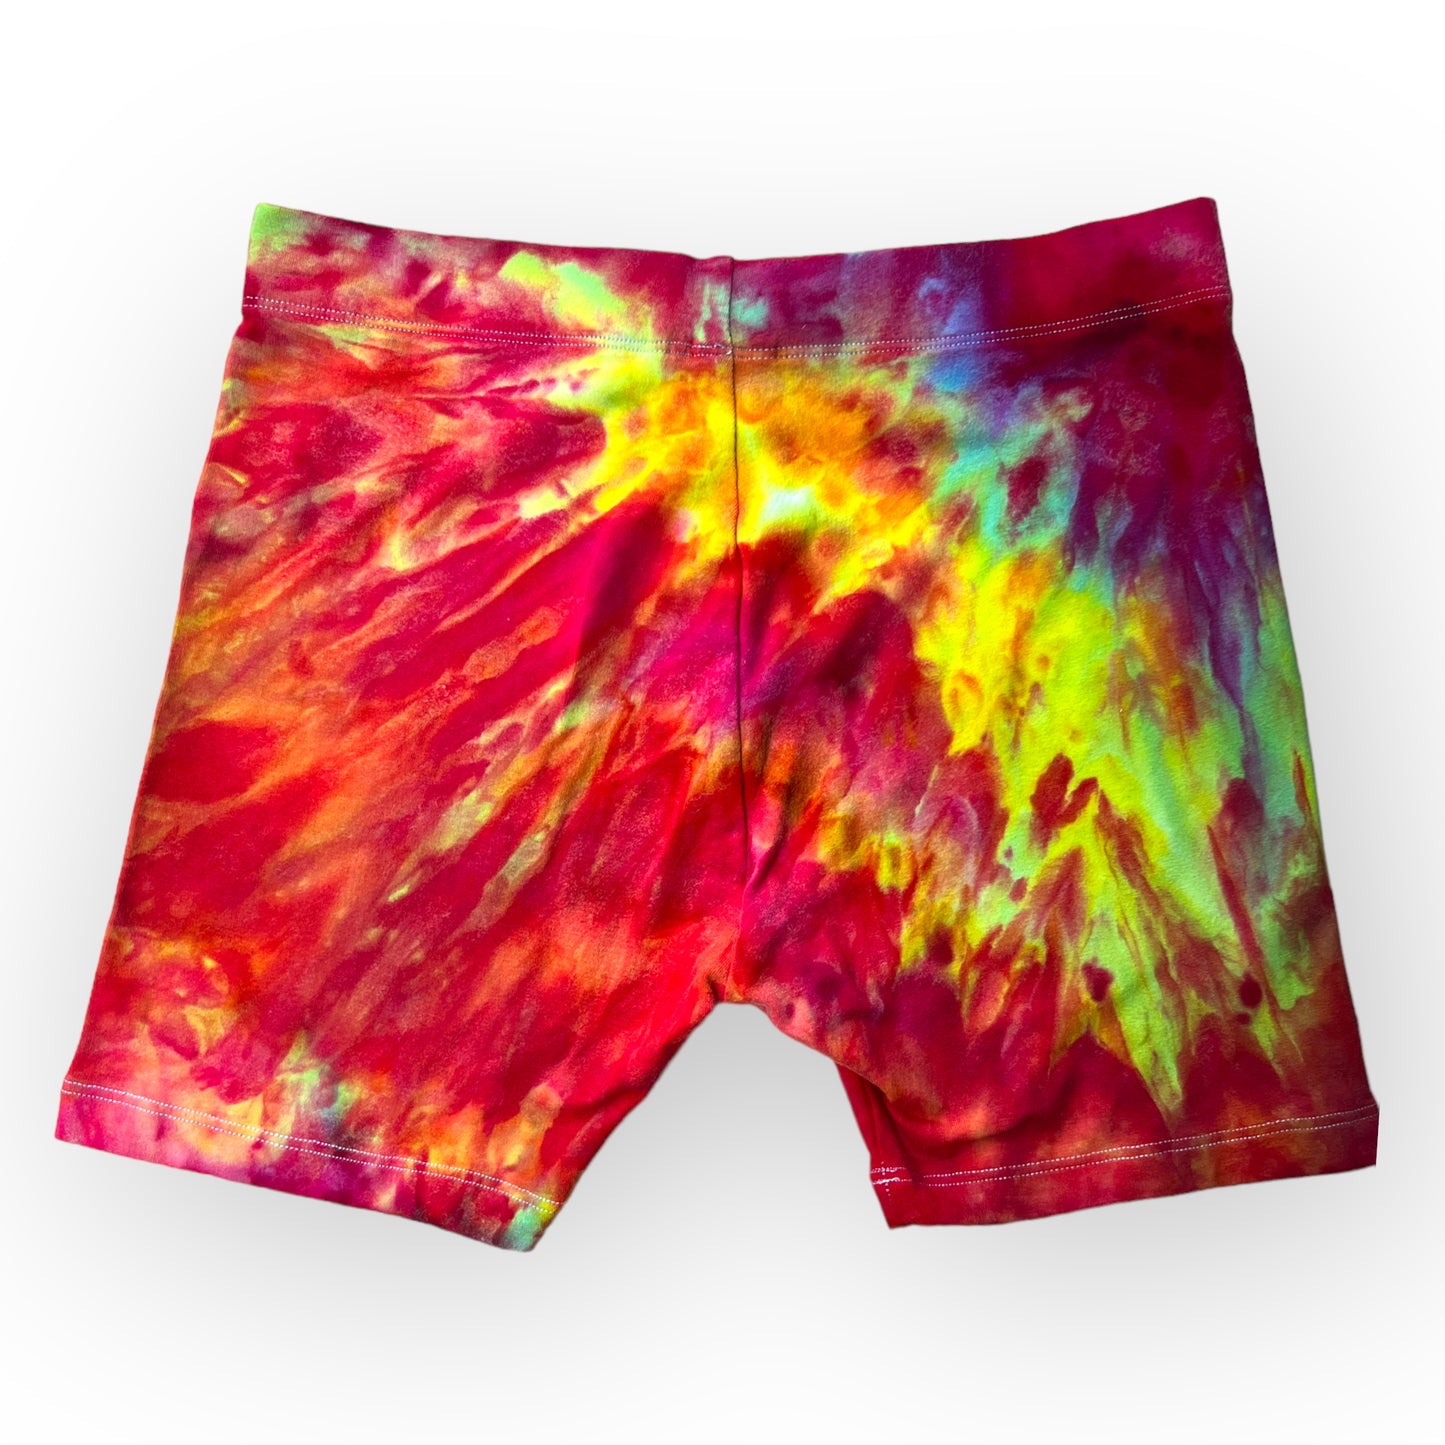 Pinks and Yellows Tie Dye Bike Shorts Age 12